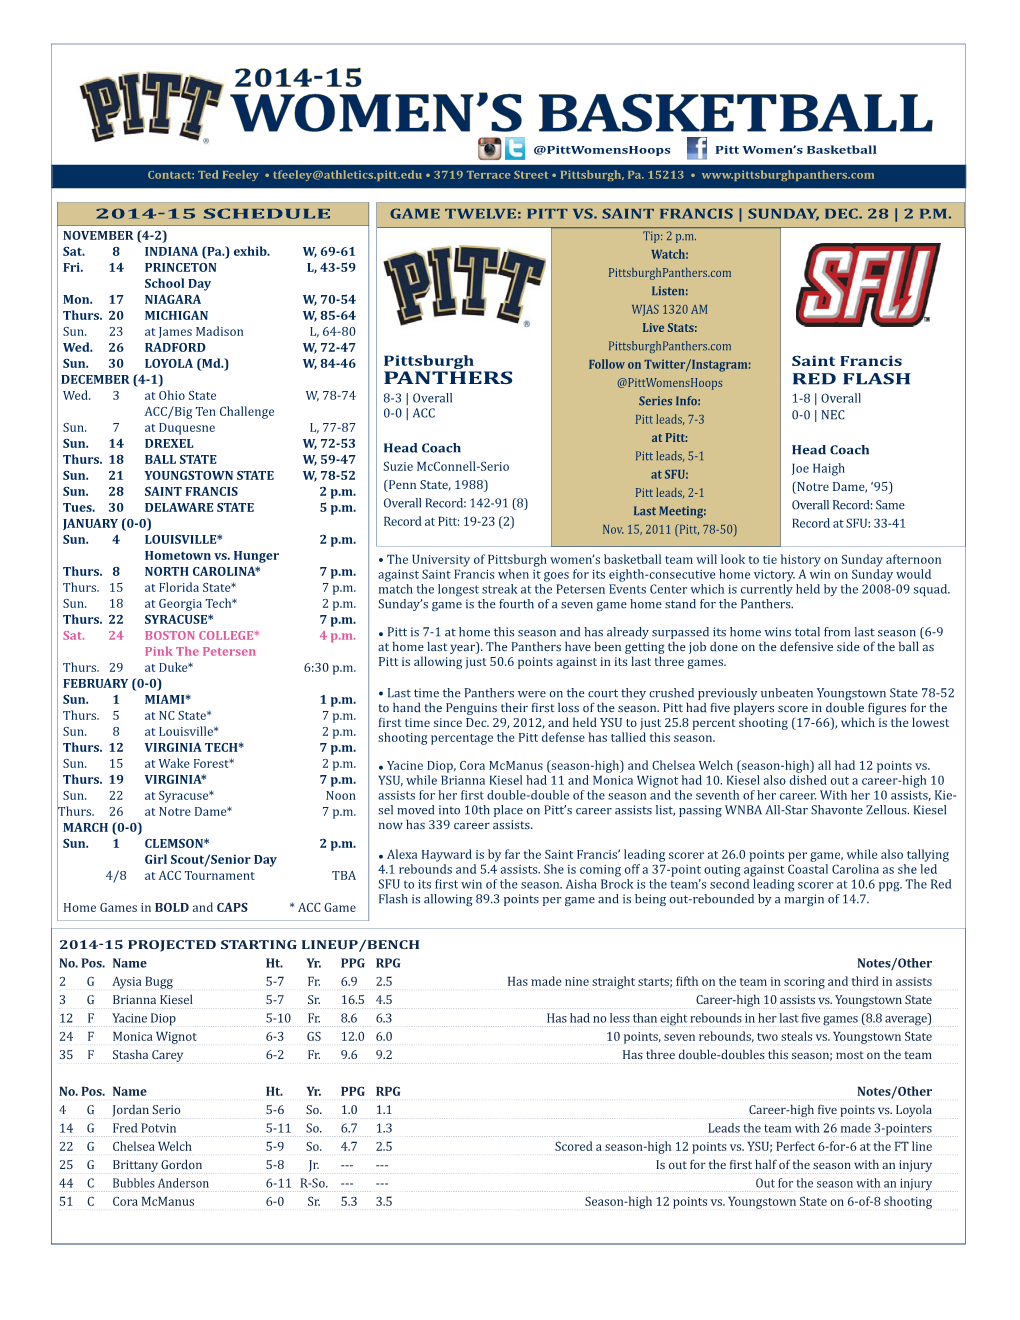 Women's Basketball Pitt Individual Game-By-Game (As of Dec 25, 2014) All Games